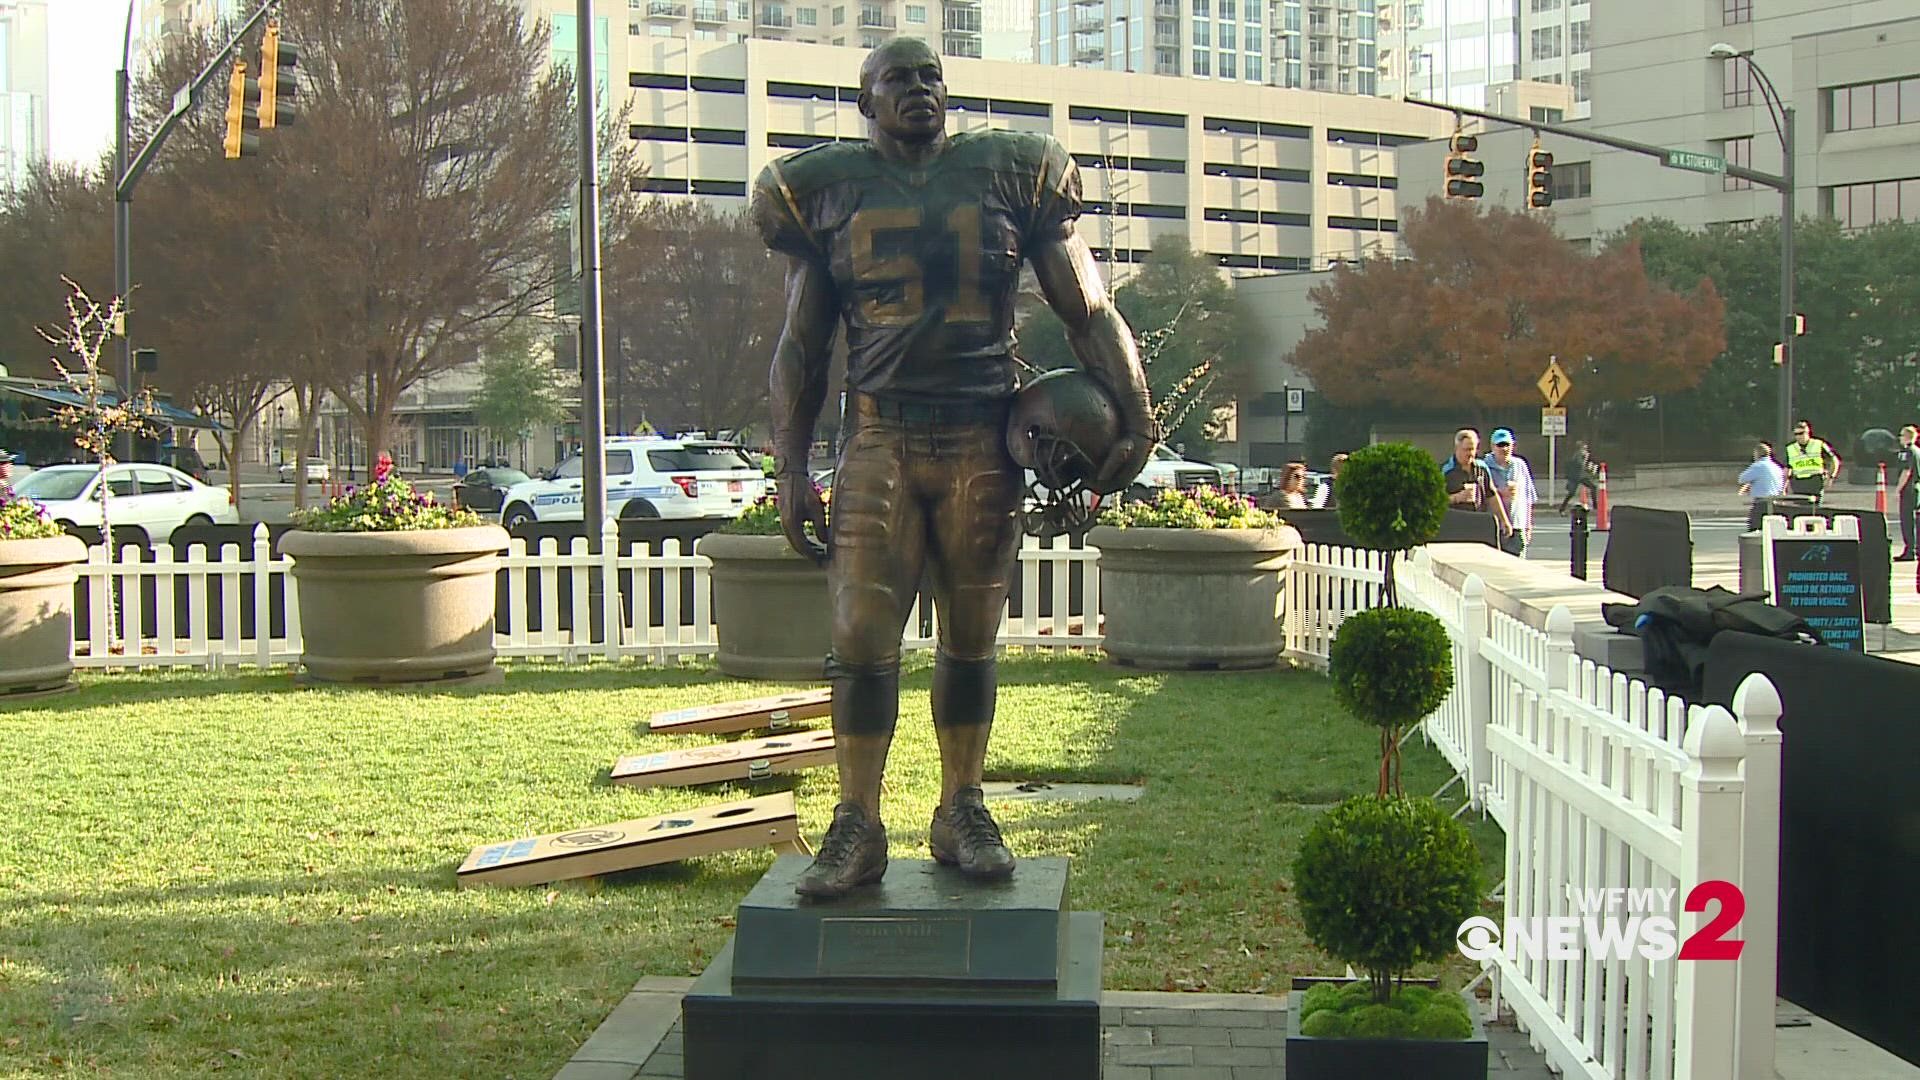 Panthers legend Sam Mills elected to Pro Football Hall of Fame 